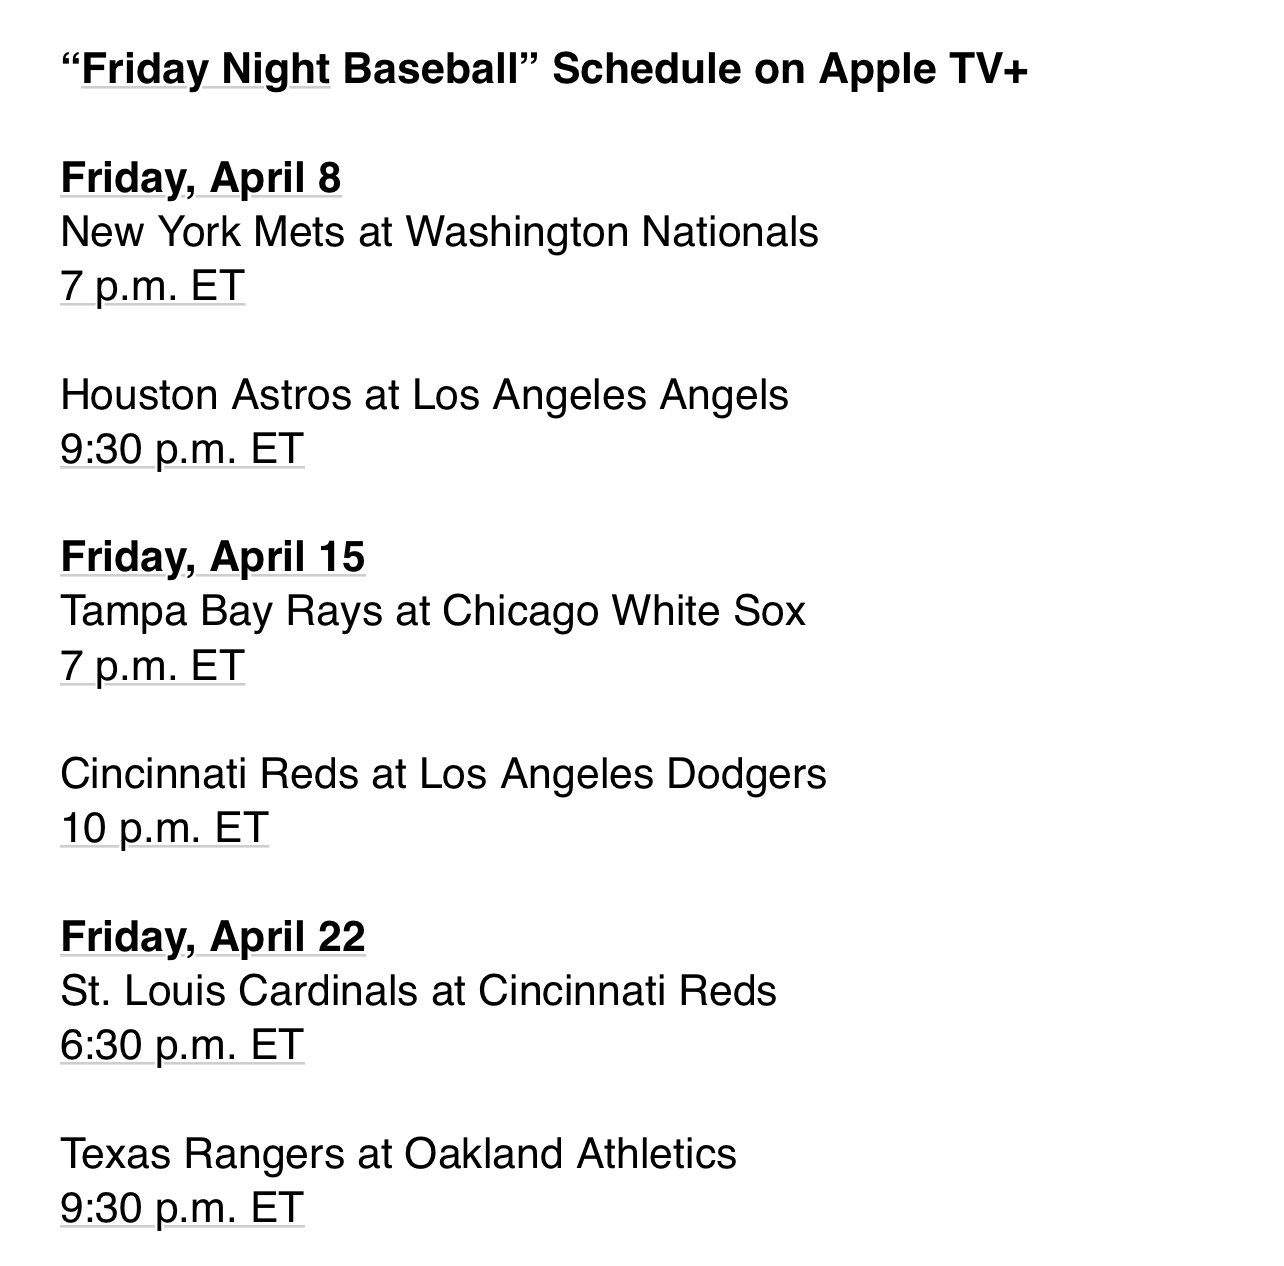 WBC national TV schedule for Tomorrow plus some exhibition games on MLB  Network  rbaseball